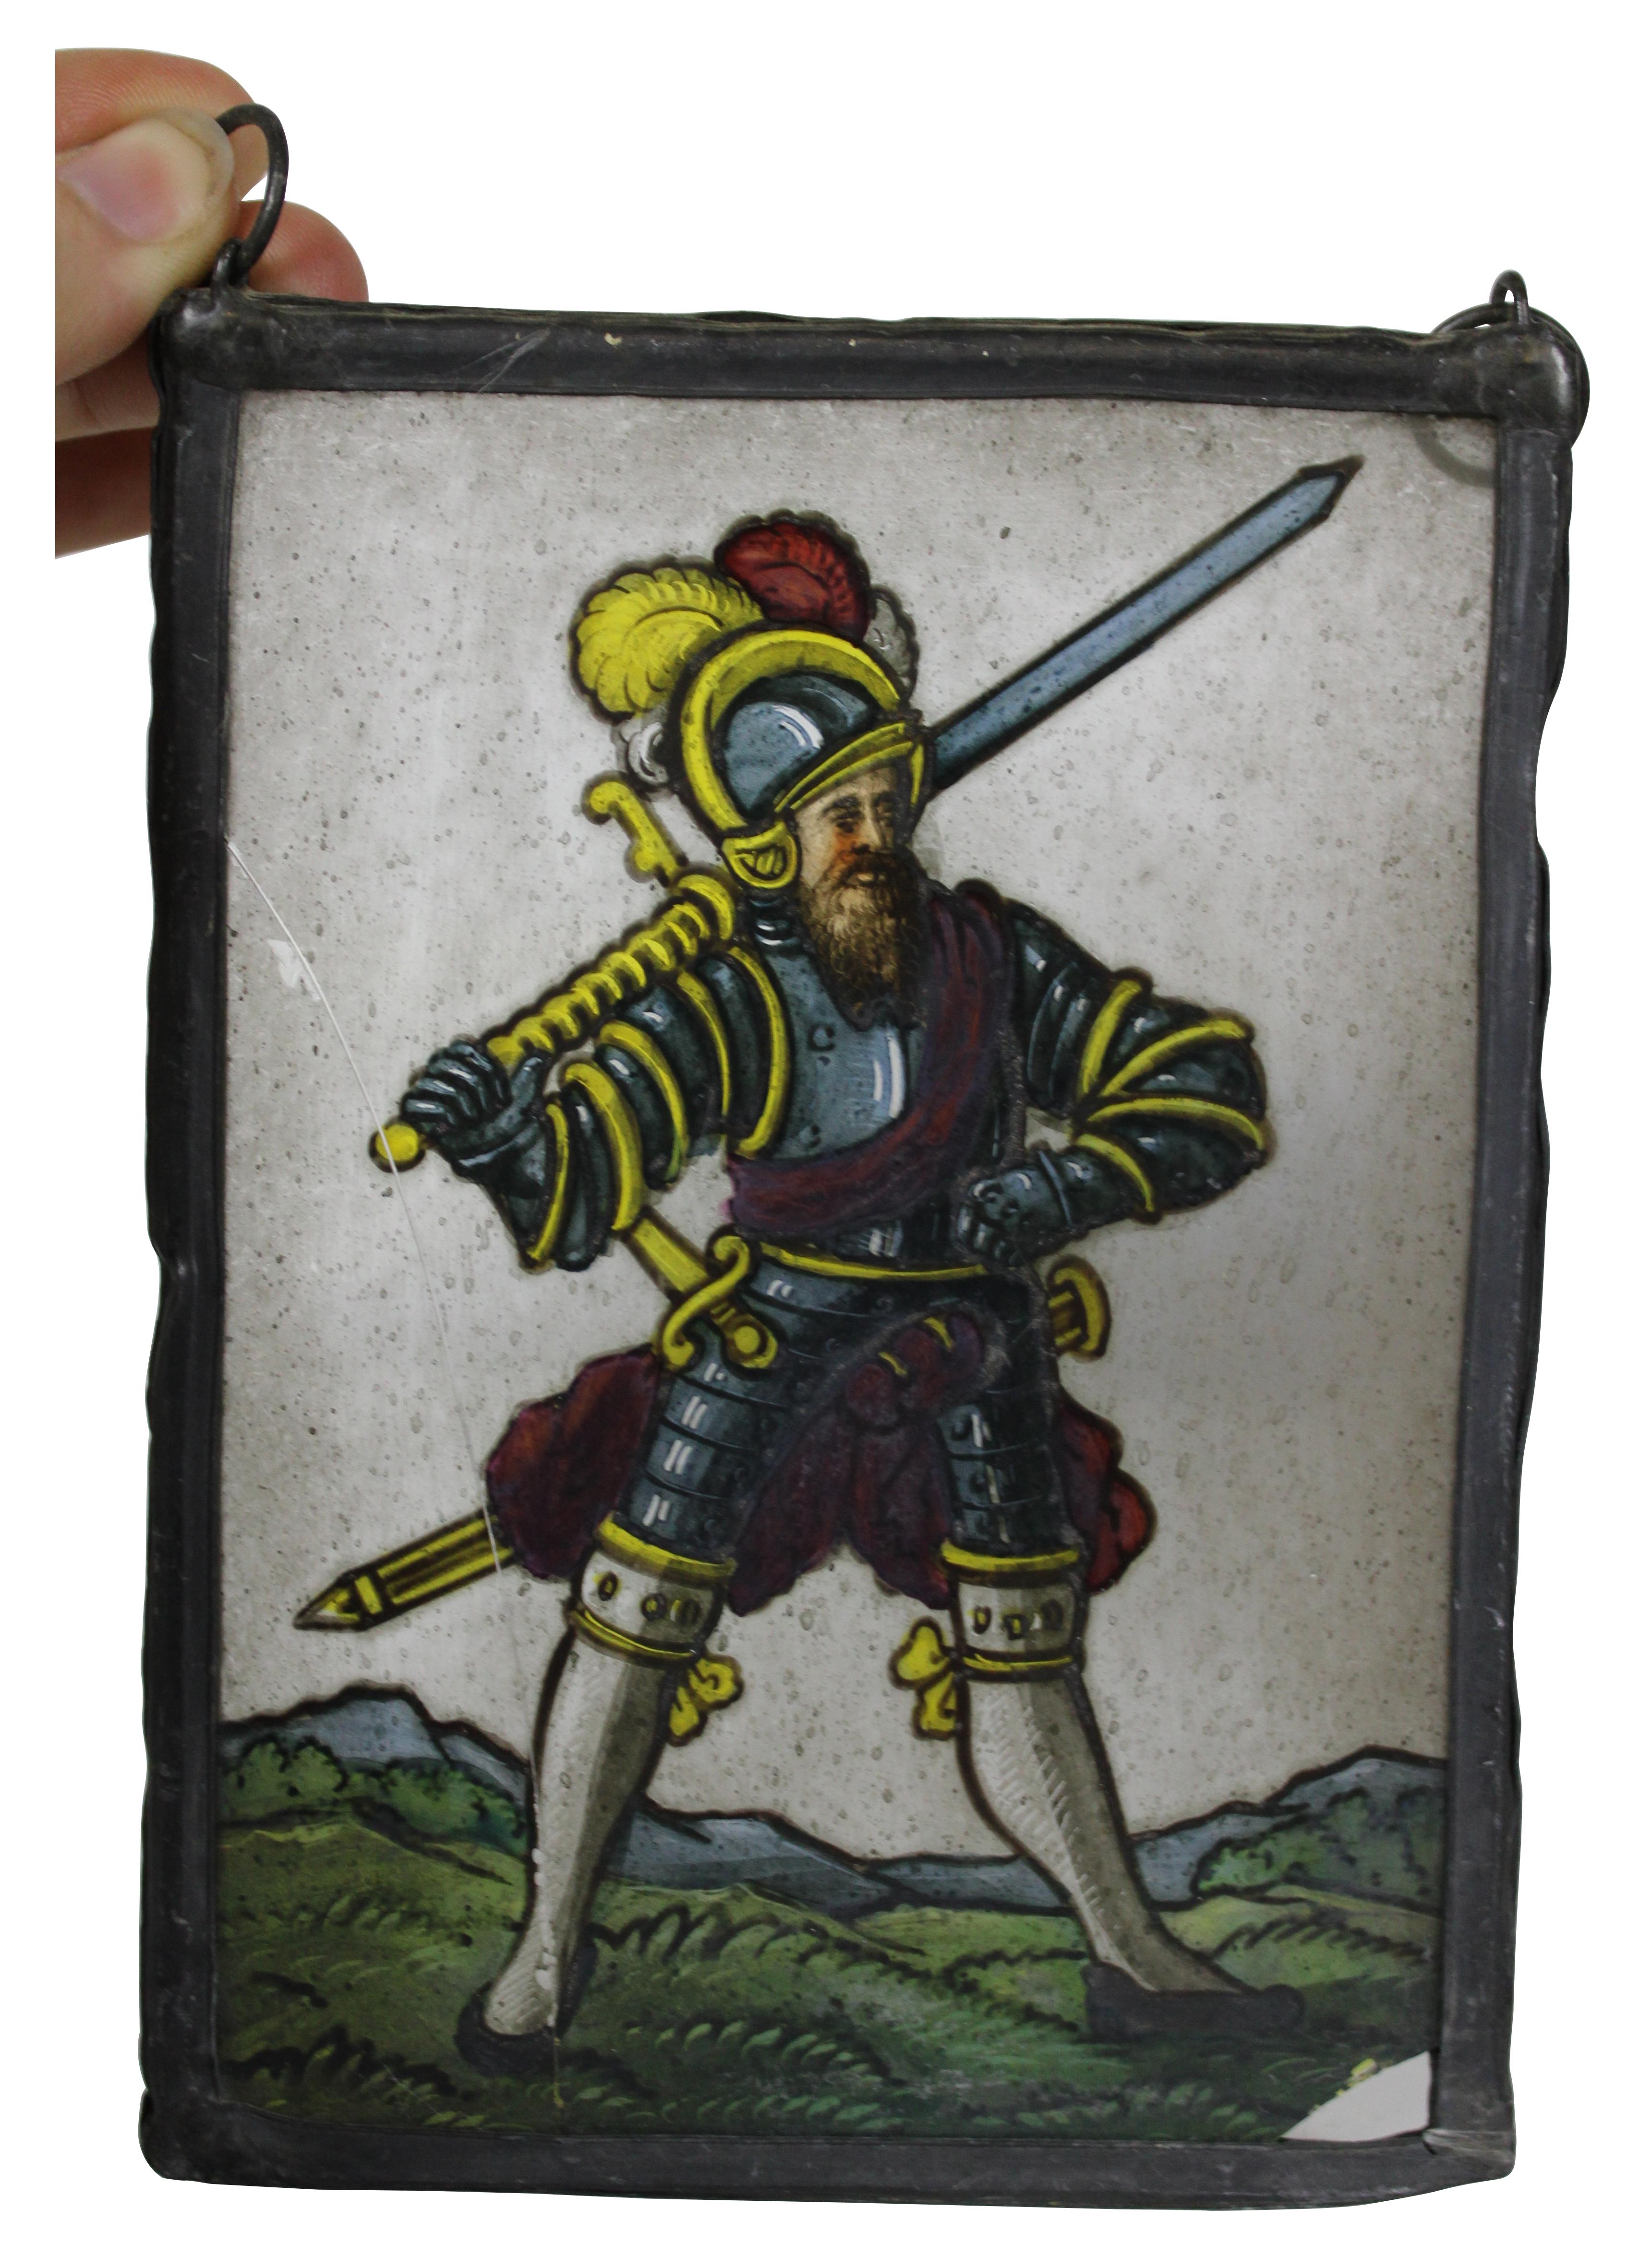 Pair of antique reverse painted glass panels in leaded frames, showing a fully armored knight with a greatsword on his shoulder and a well dressed man in blue, holding what could be a halberd.
 